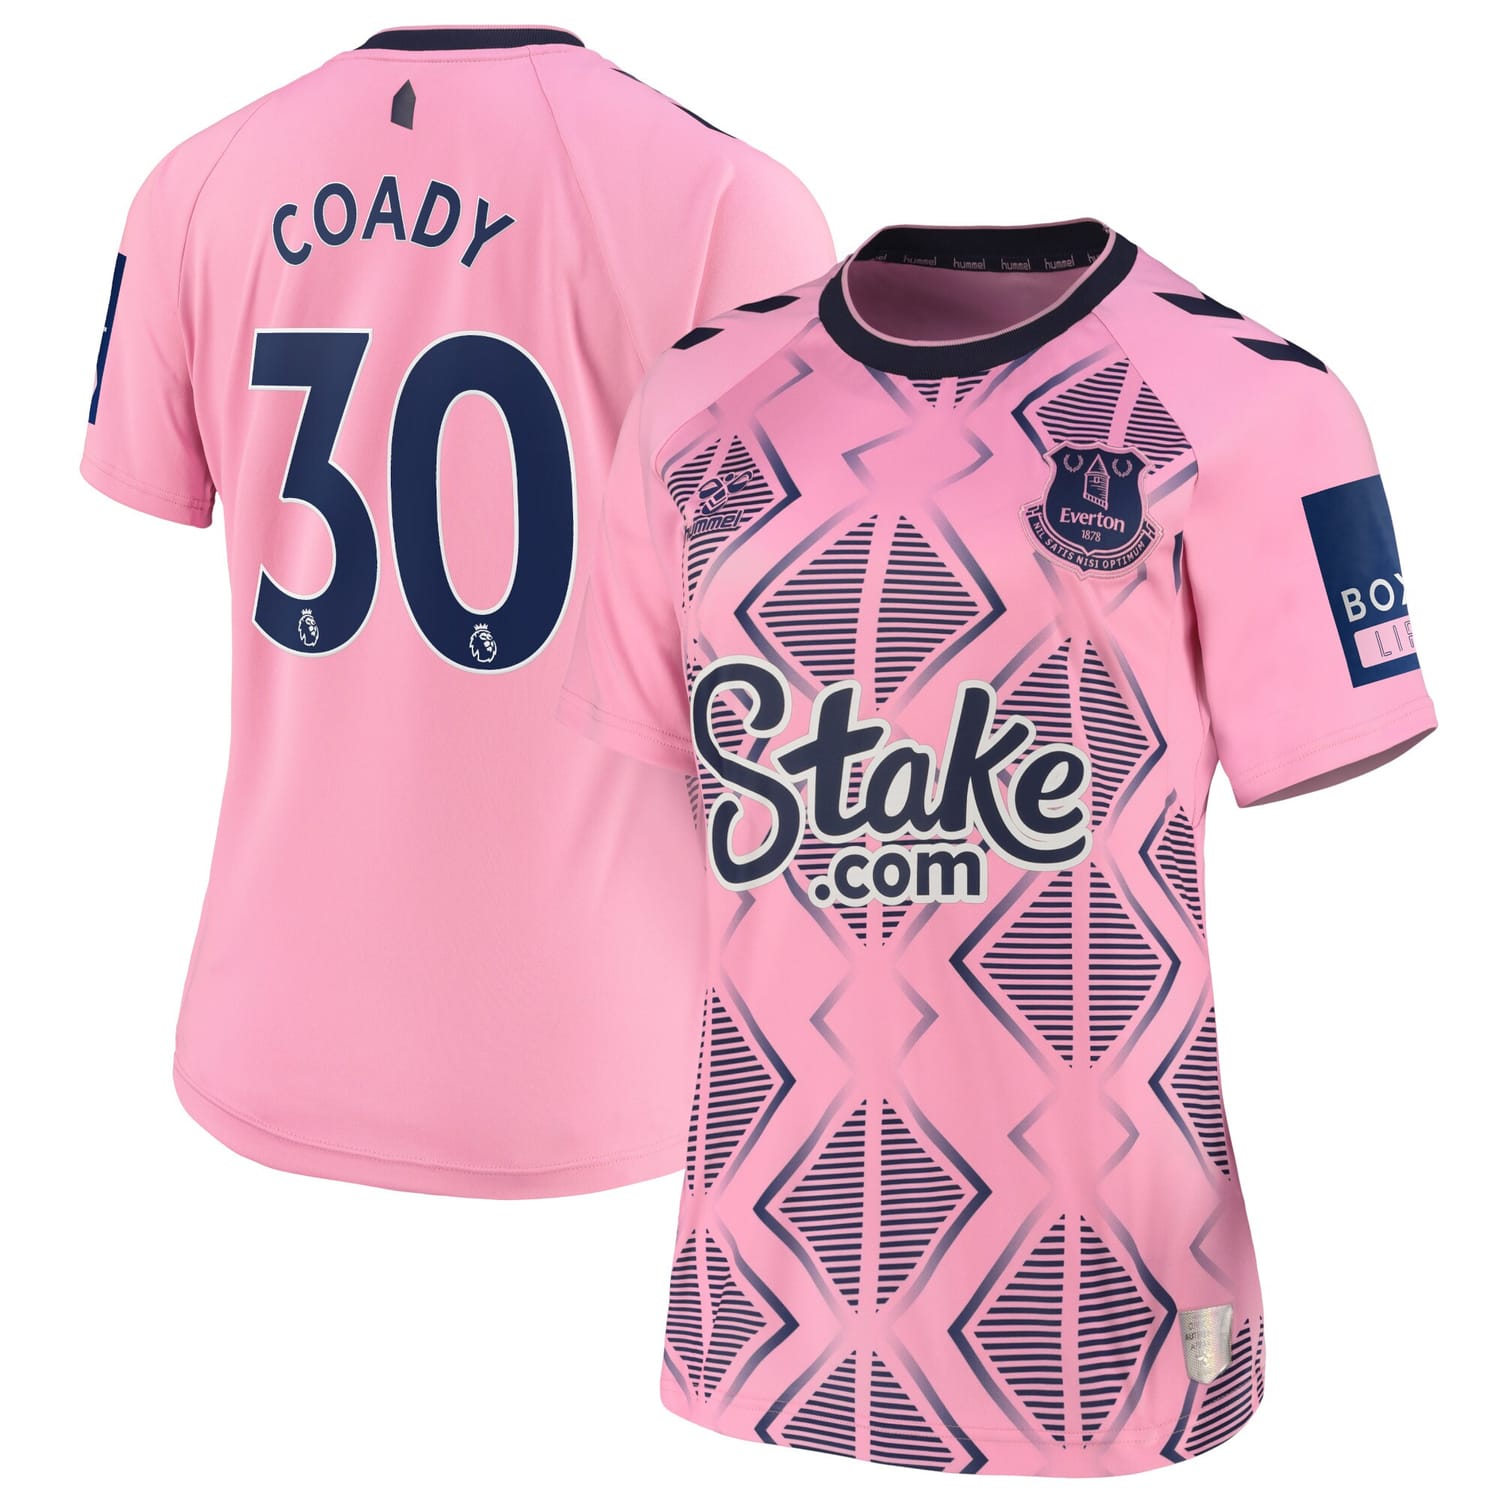 Premier League Everton Away Jersey Shirt 2022-23 player Conor Coady 30 printing for Women